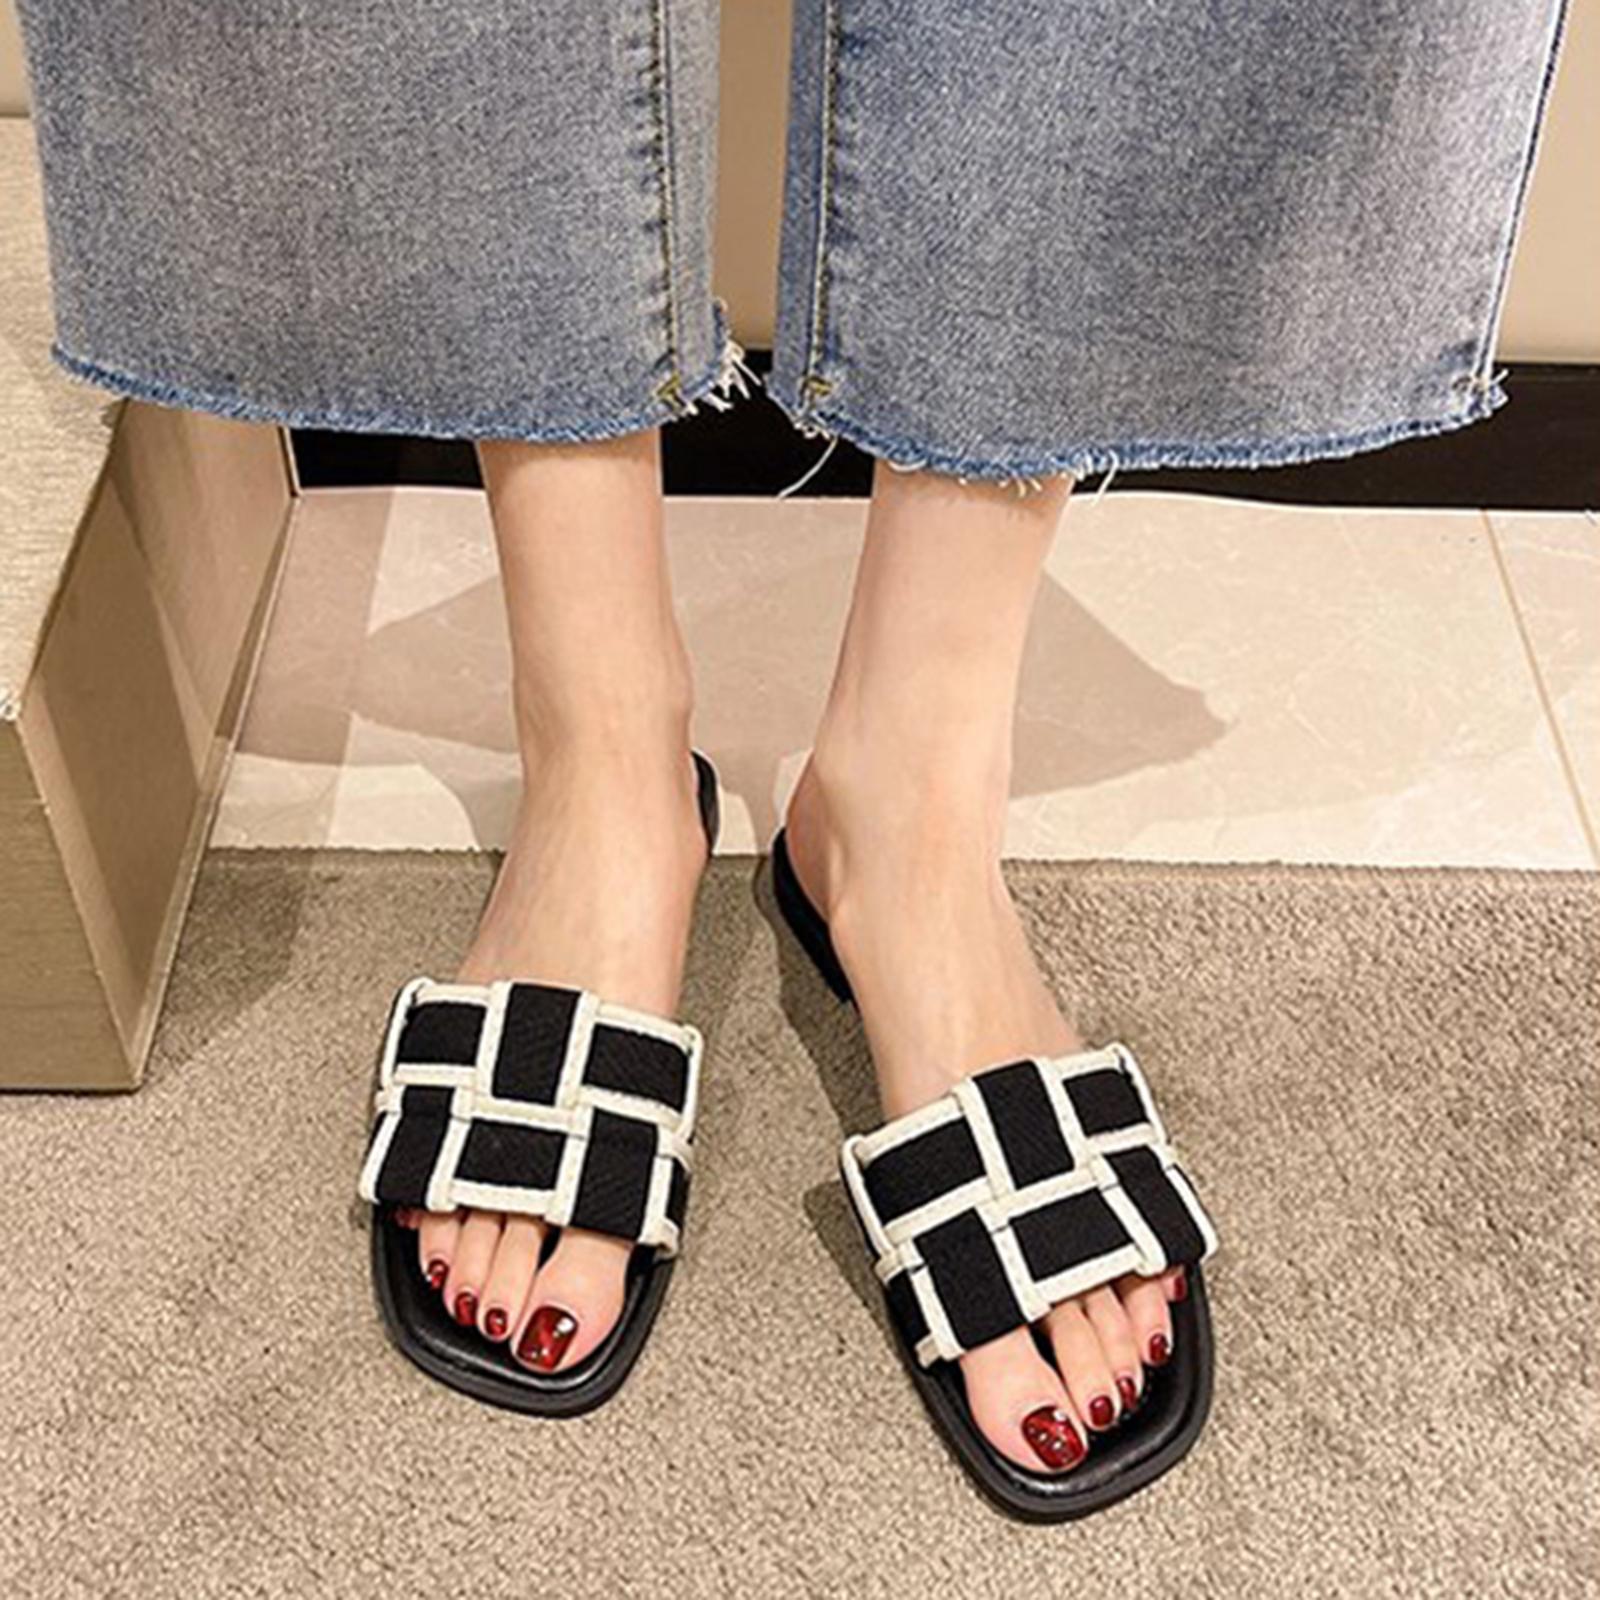 Woven Flat Slippers Comfortable House Slippers Outdoor Nonslip Women Sandals